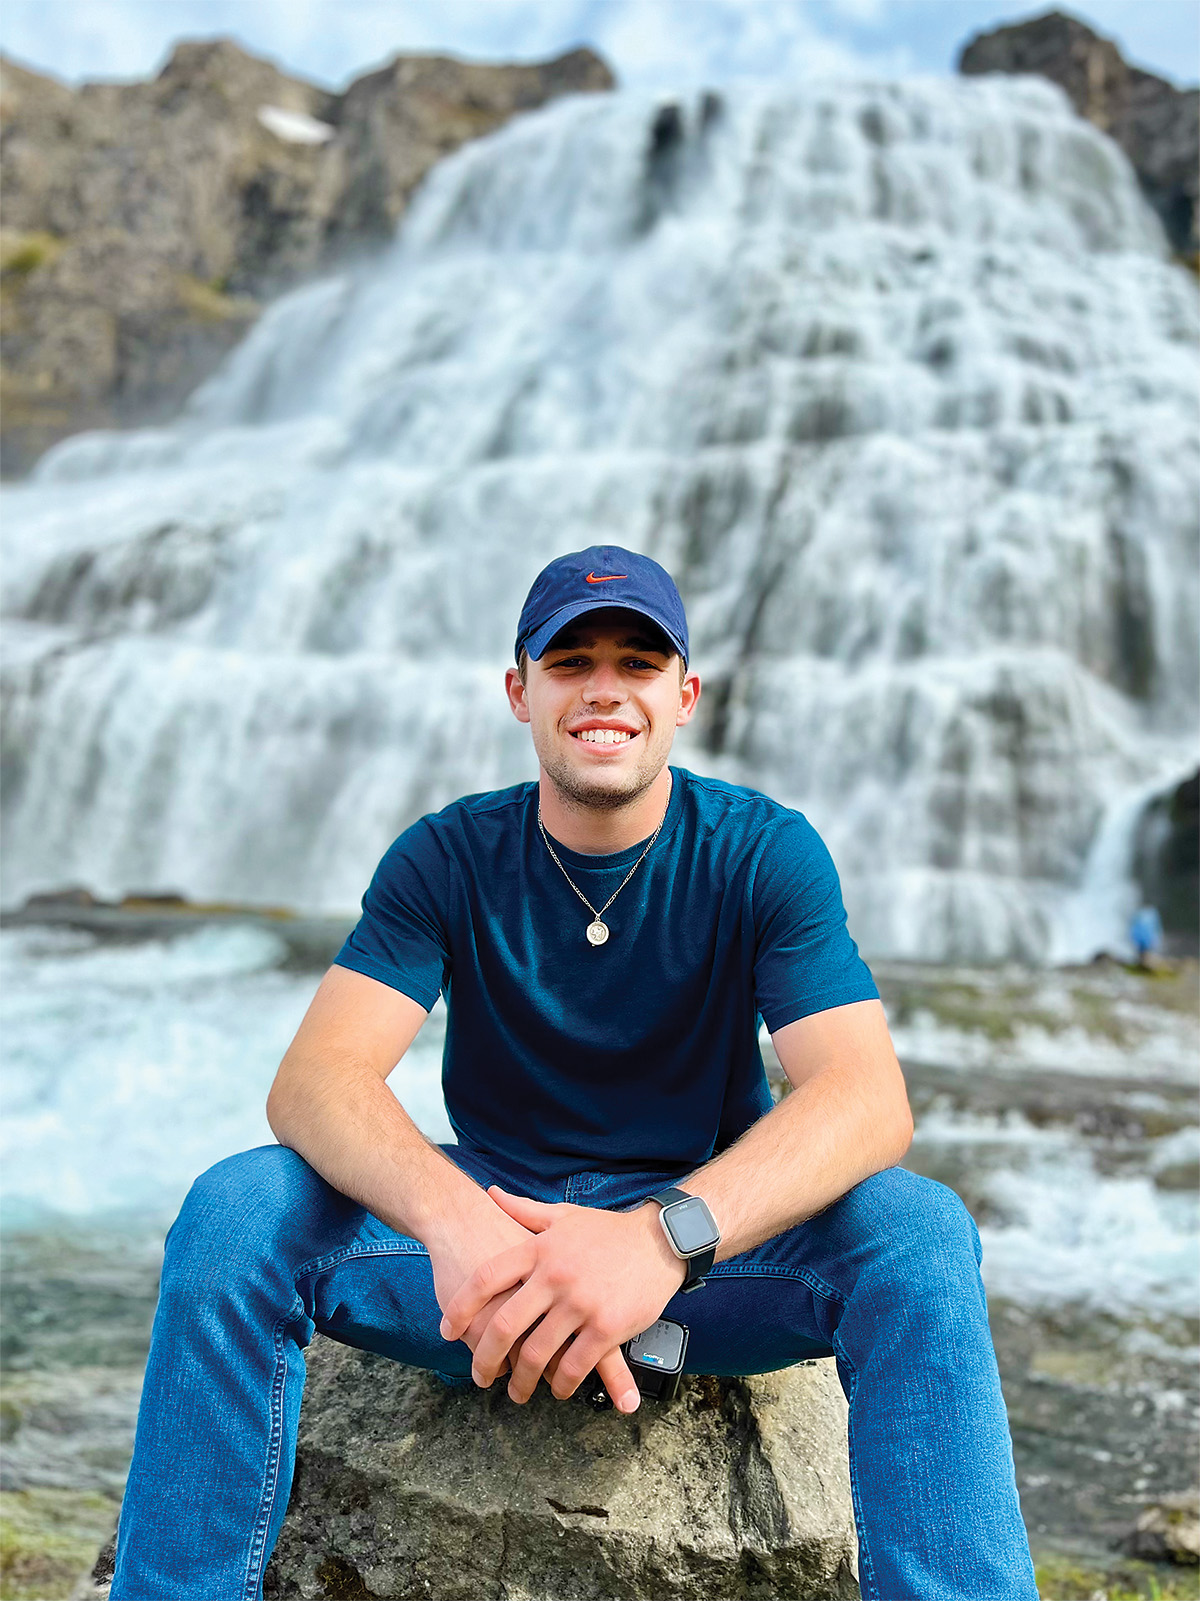 As part of his travels through Iceland, Lucas Grabowski ’23 visited the Dynjandi Waterfall in the Westfjords region of the country.